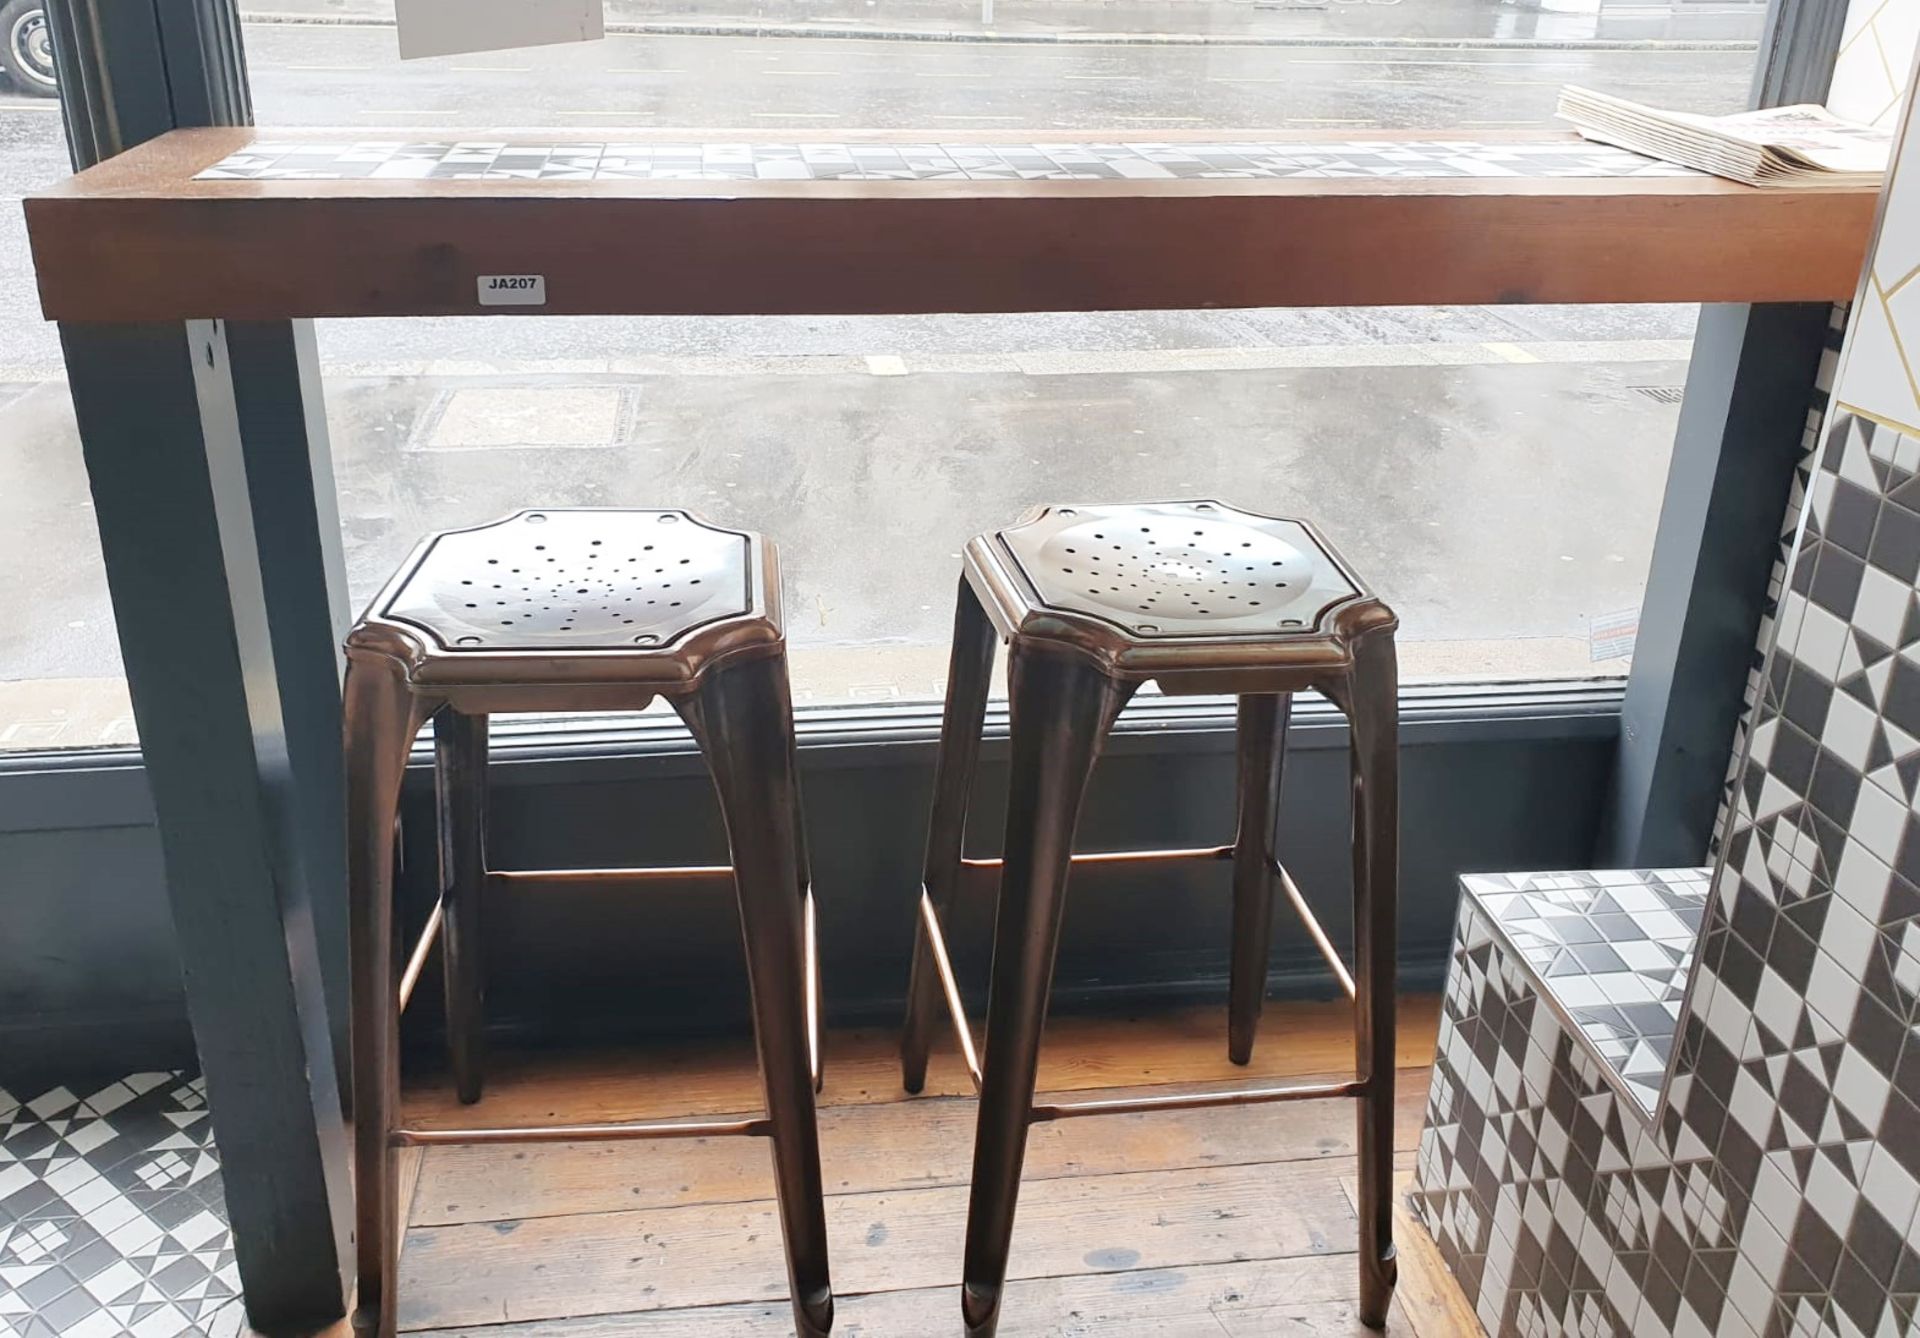 1 x Restaurant Seating Bench Table With Tiled Top and Two Copper Bar Stools - Bench Size H110 x W167 - Bild 3 aus 5